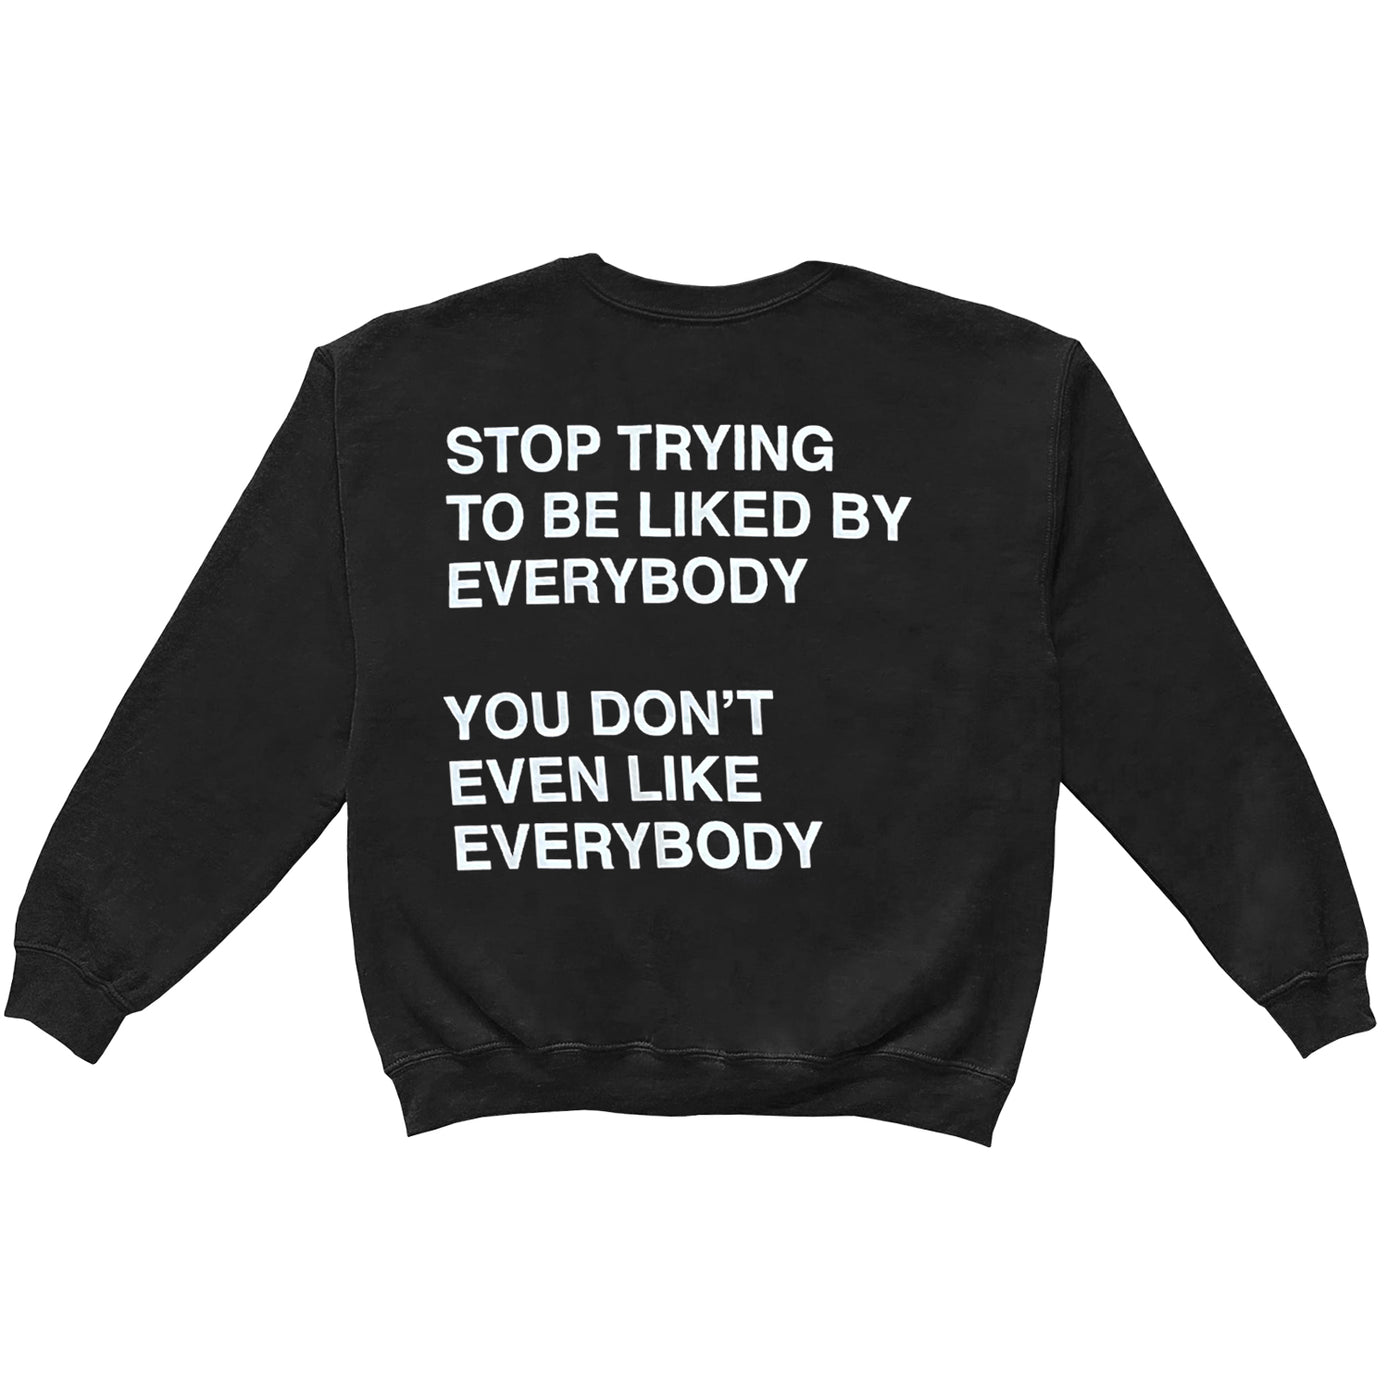 We're Not Really Strangers black Stop Trying Crewneck back reading "Stop trying to be liked by everybody. You don't even like everybody" in white font. 